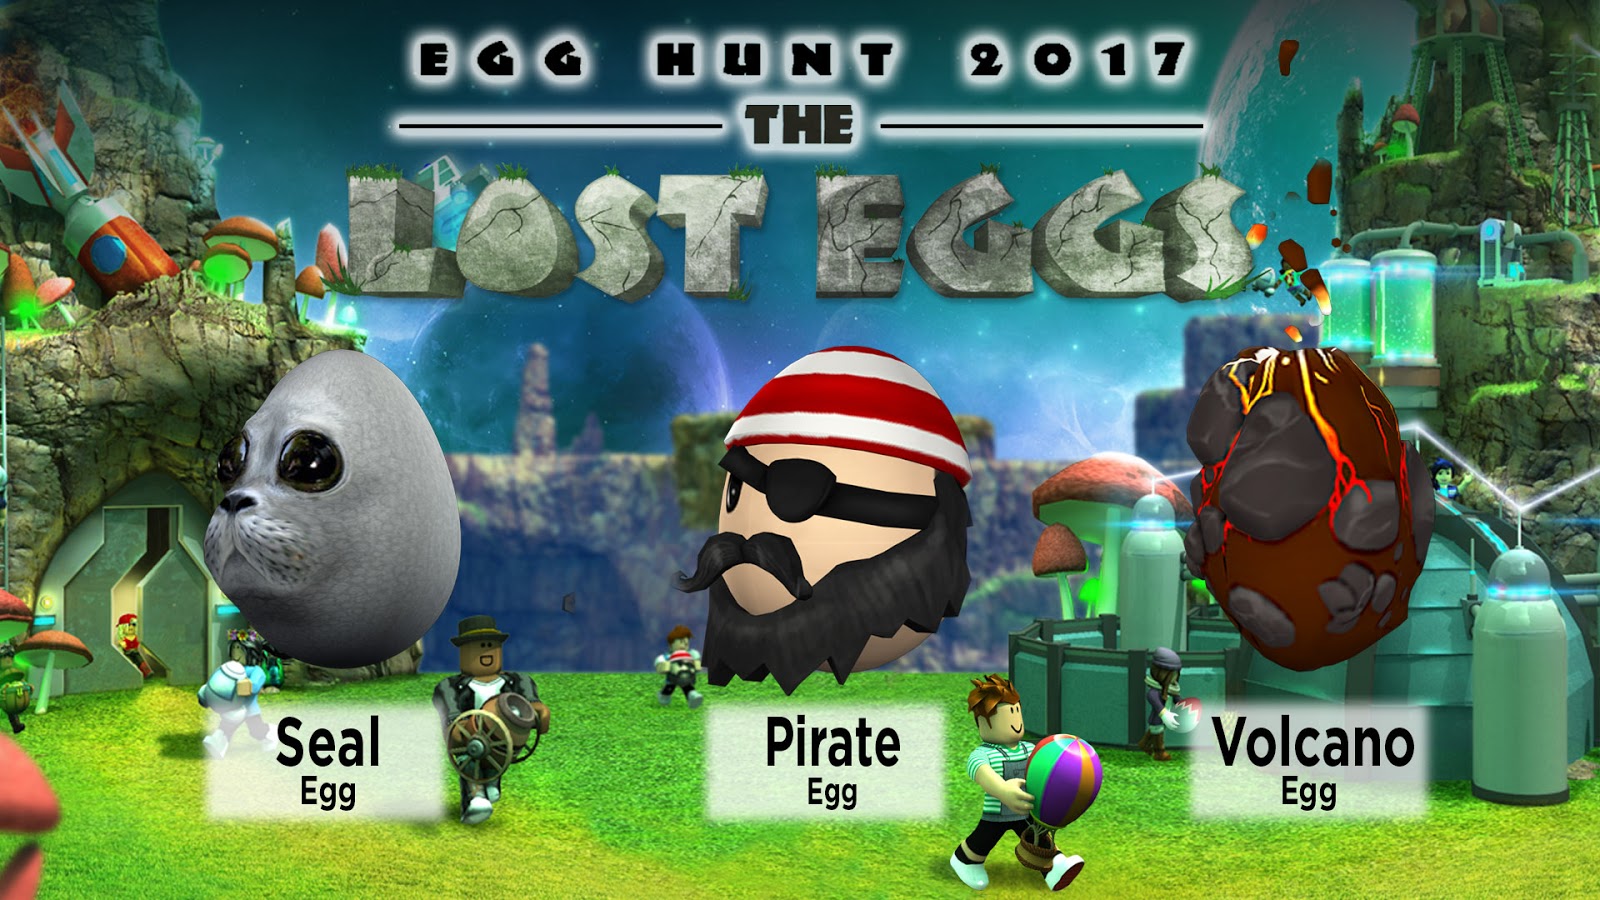 Giveaway Roblox Egg Hunt Prize Pack Mommy Katie - alex in qu is it or master pajamas roblox